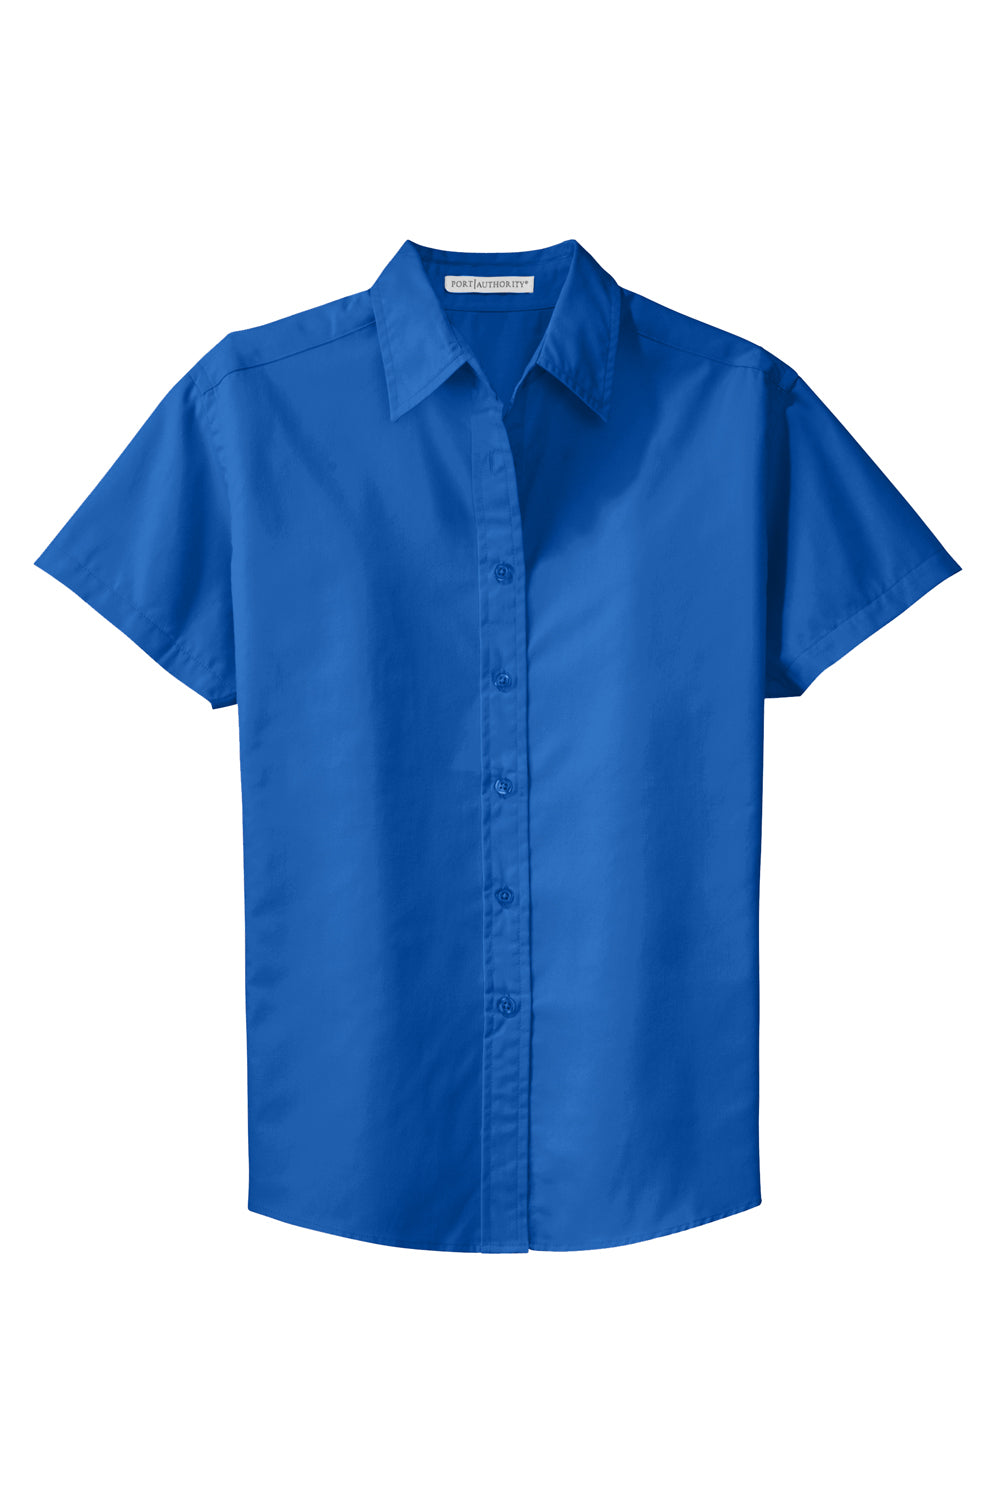 Port Authority L508 Womens Easy Care Wrinkle Resistant Short Sleeve Button Down Shirt Strong Blue Flat Front